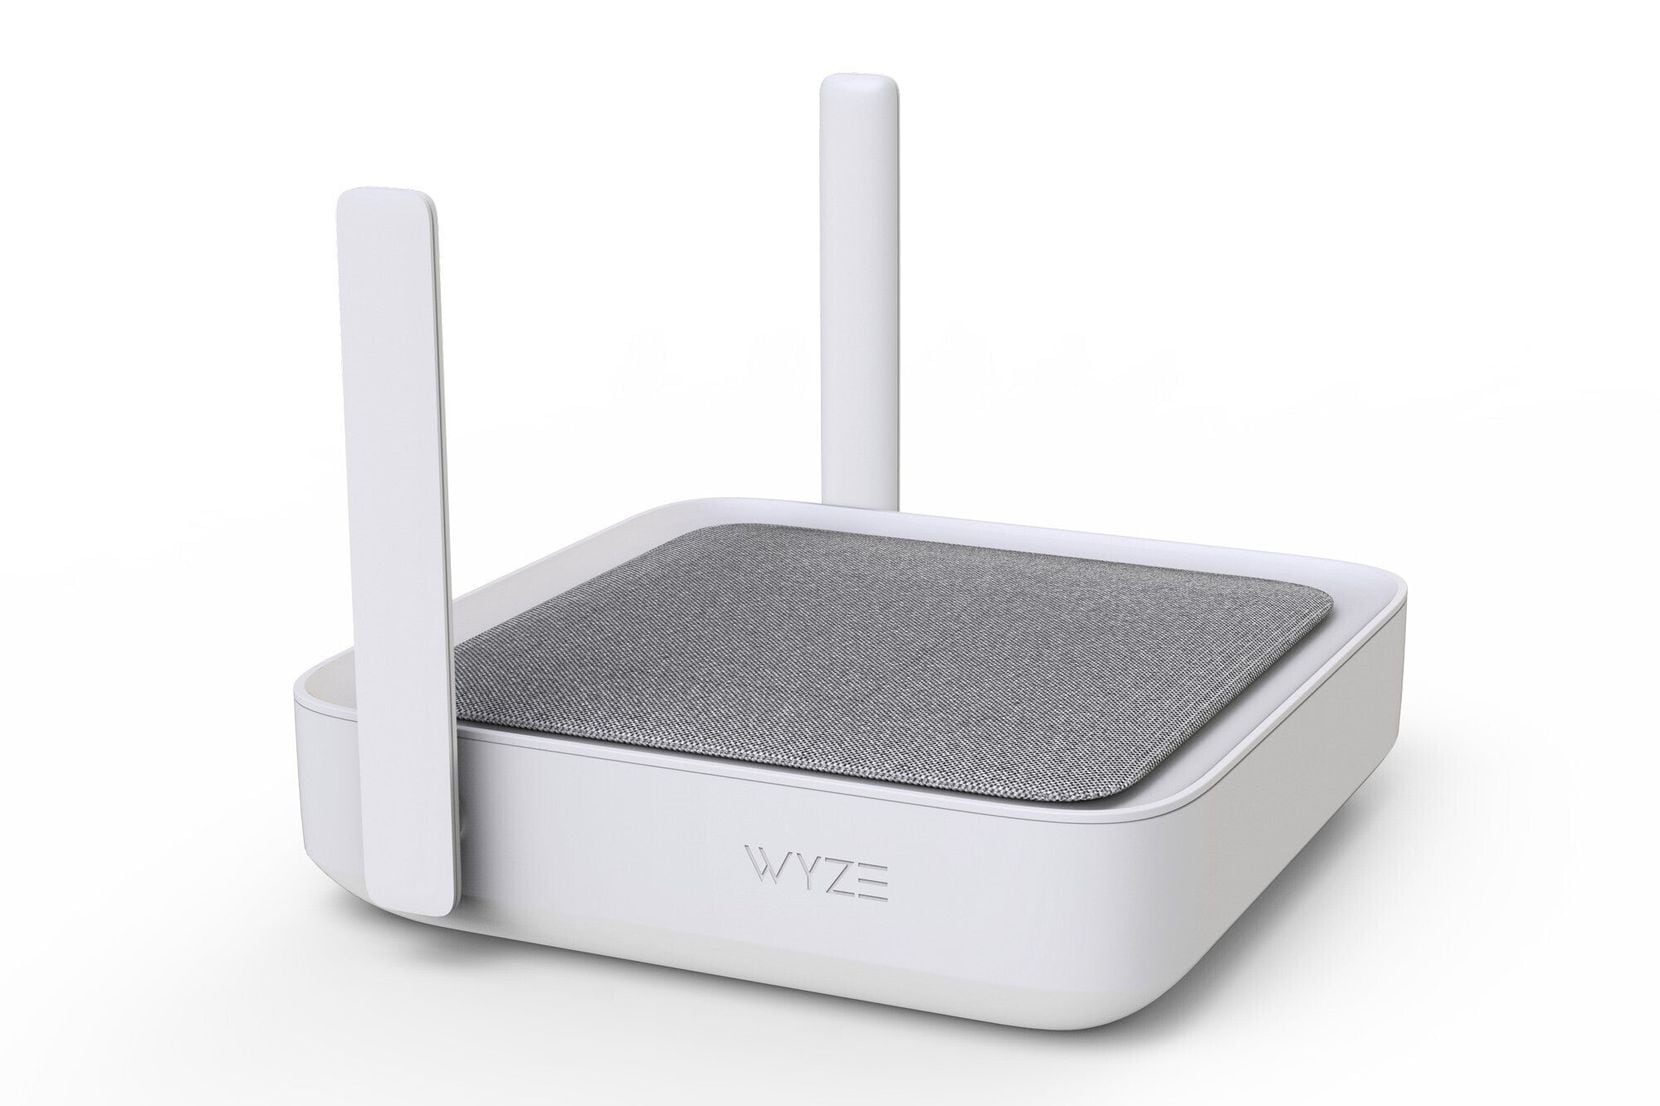 The hub is the heart of the Wyze Home Monitoring system.